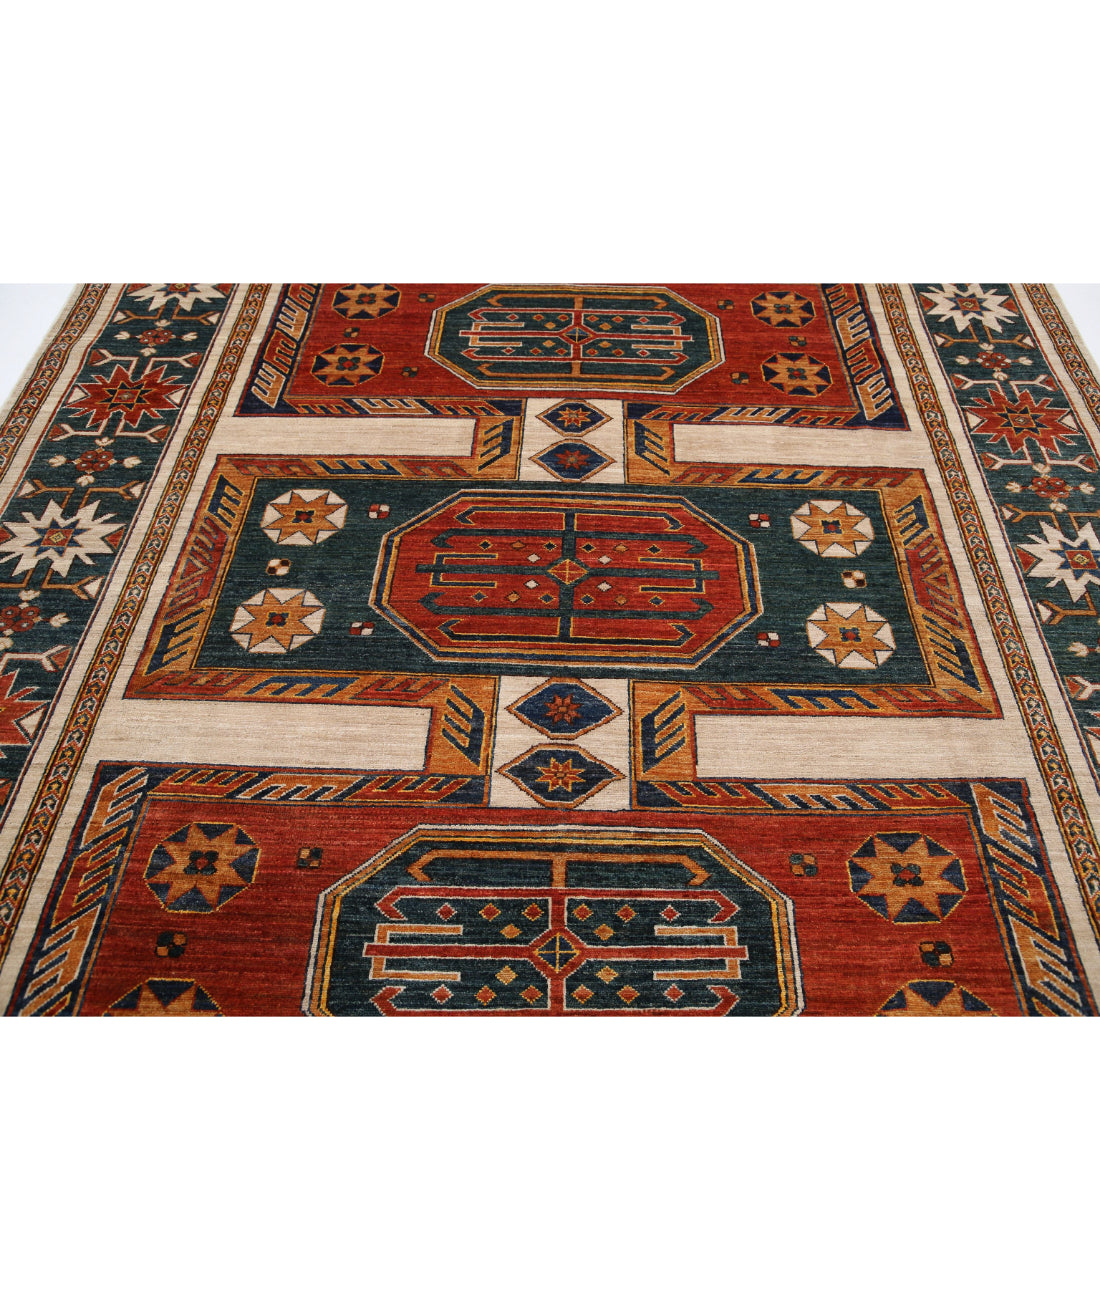 Hand Knotted Nomadic Caucasian Humna Wool Rug - 8'3'' x 9'9'' 8'3'' x 9'9'' (248 X 293) / Ivory / N/A